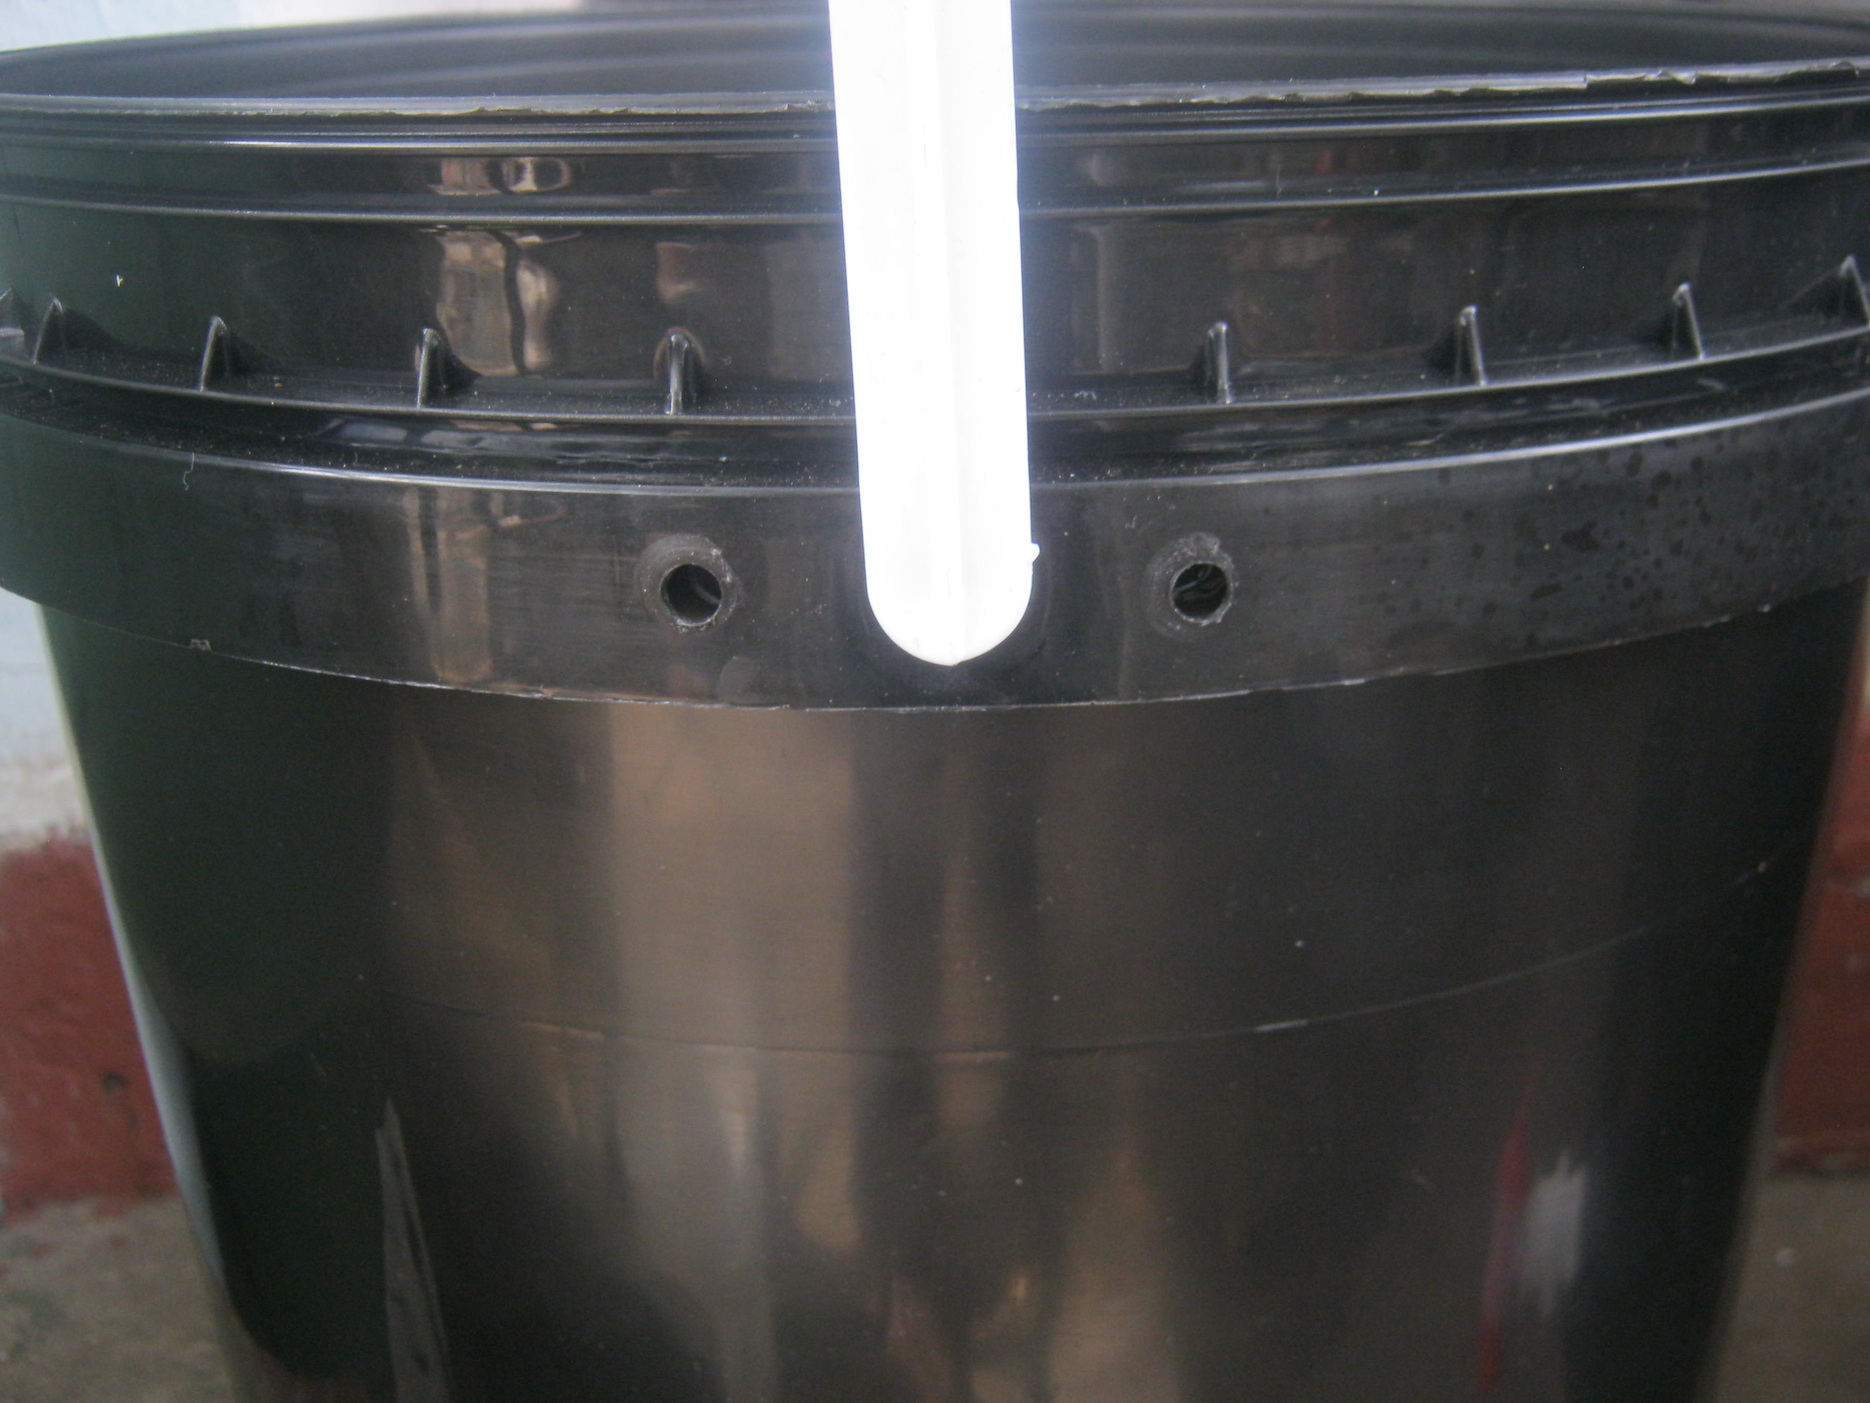 Working bin of a worm farm with 2 ventilation holes near the top of its side